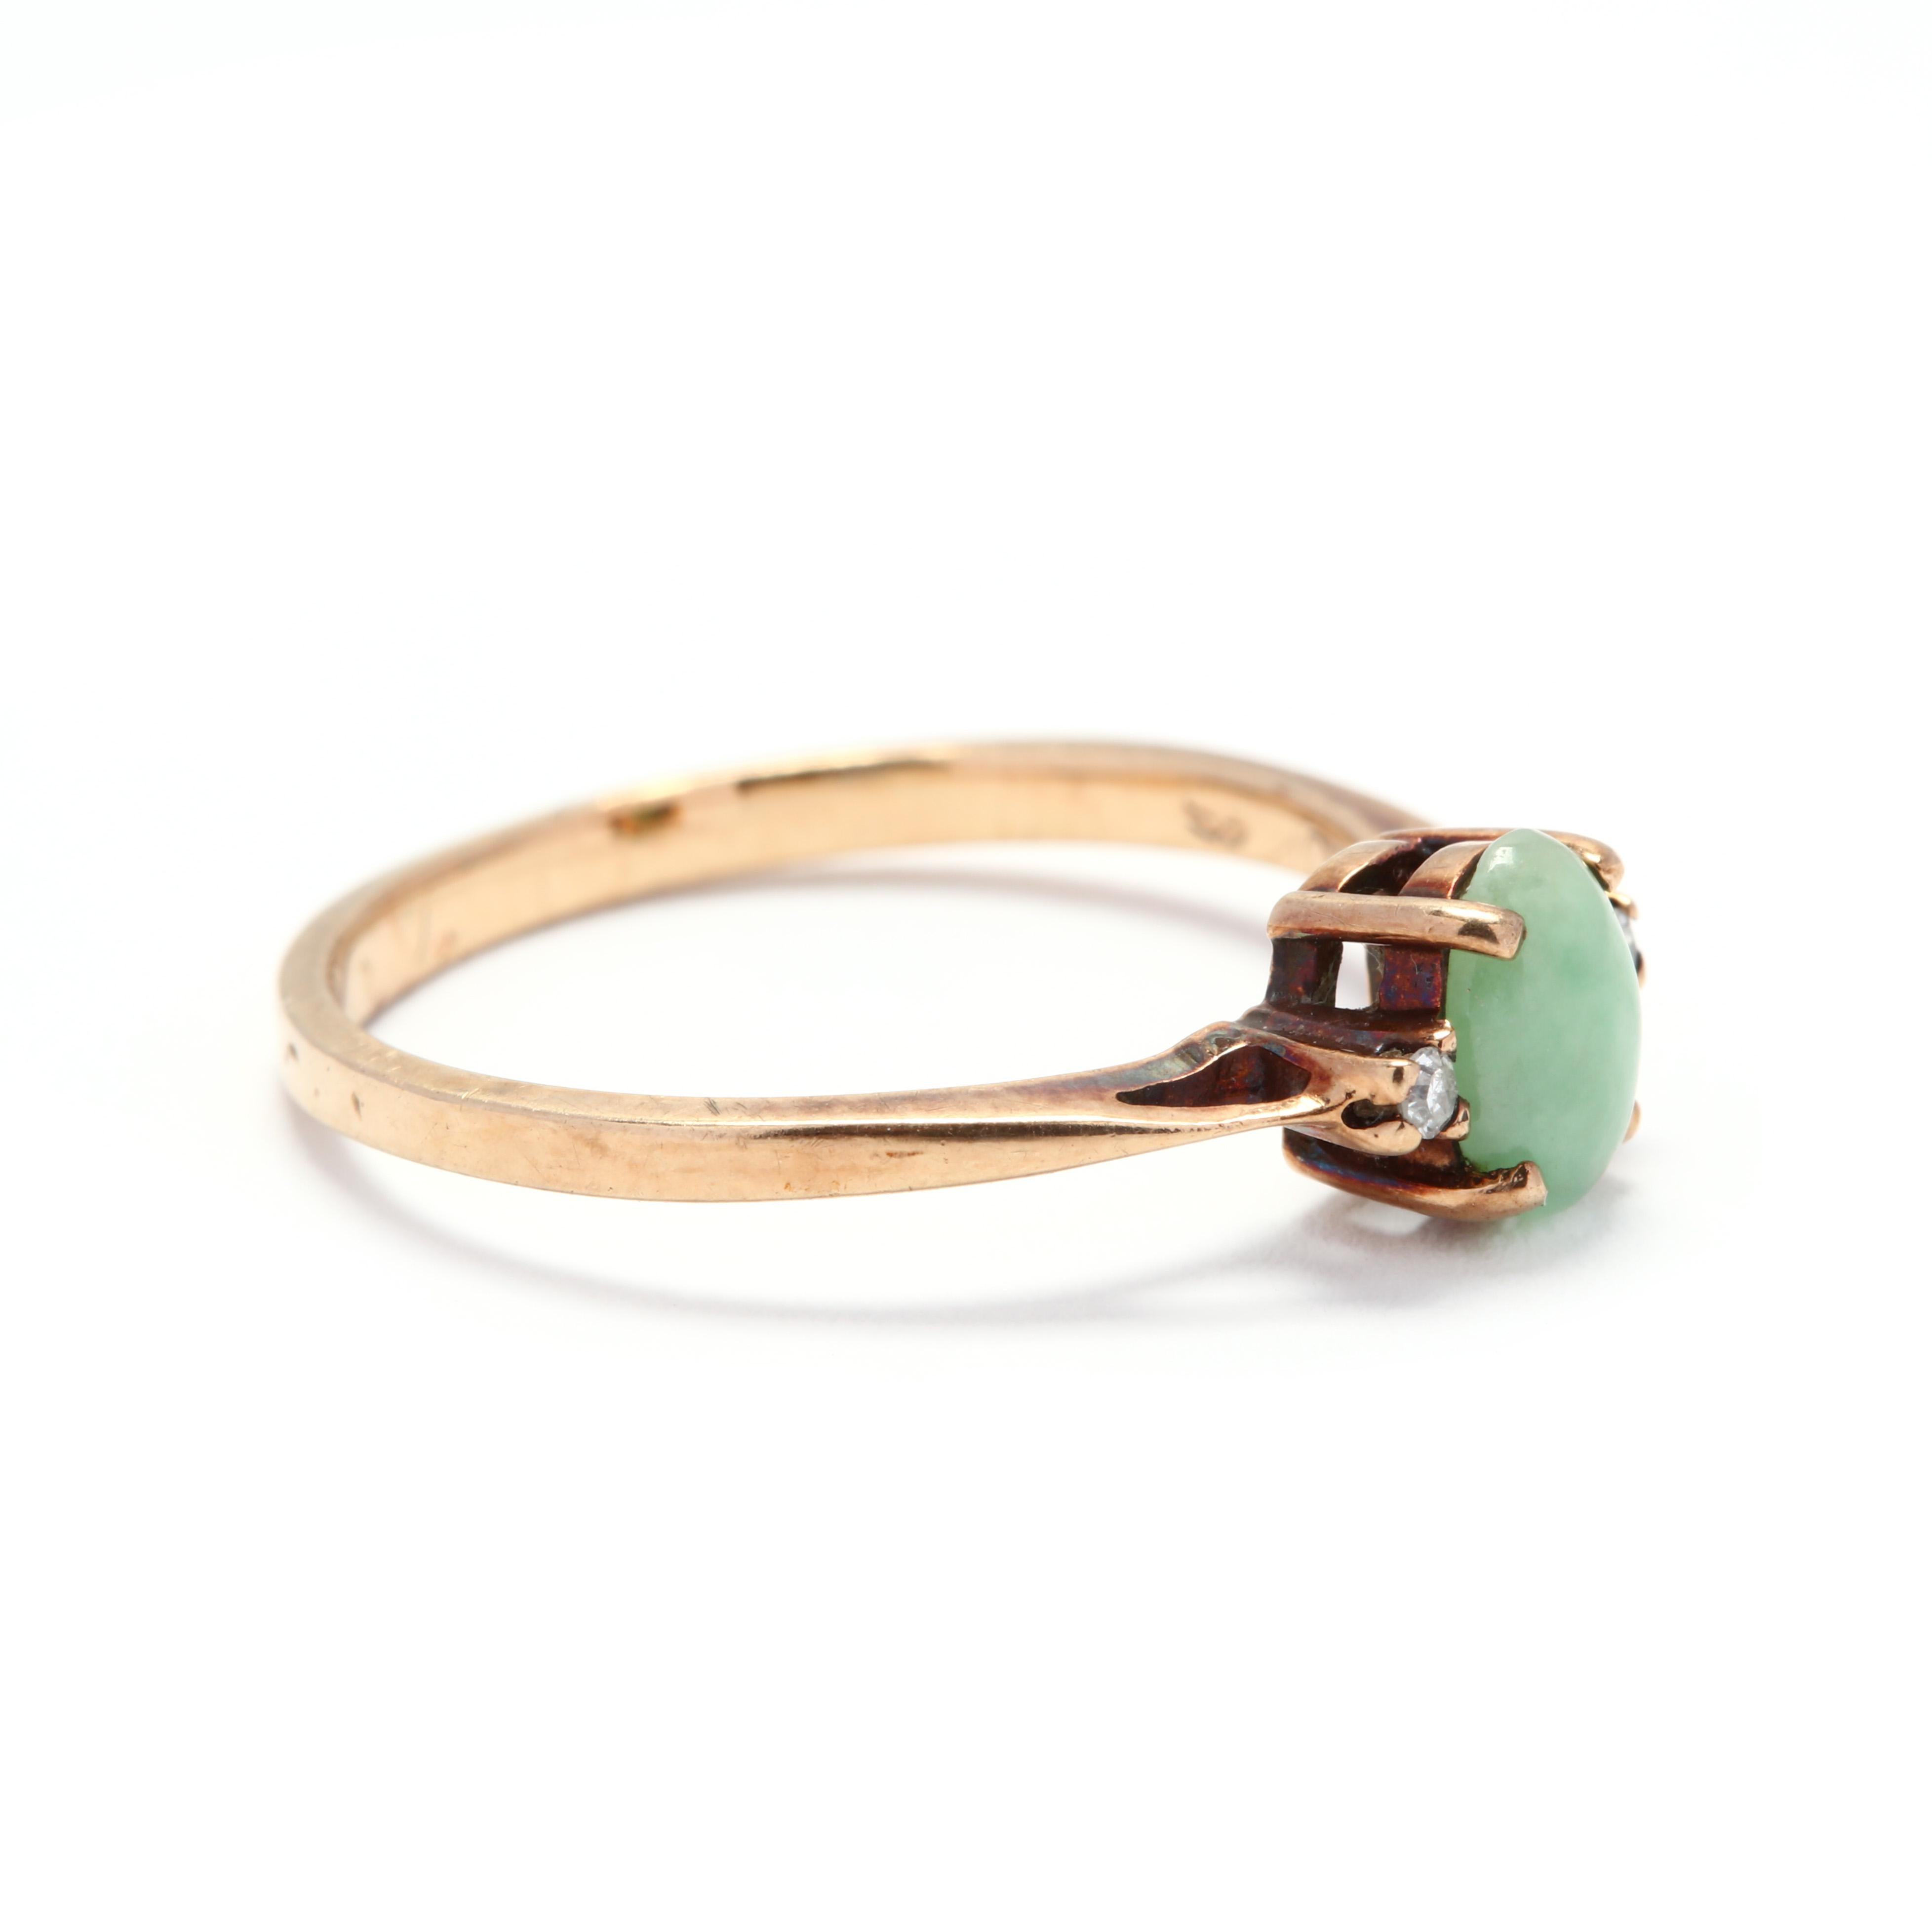 A 10 karat yellow gold, jade and diamond ring. Centered on a prong set, oval cabochon jade stone with a full cut round diamond on either side. A minimalist's dream!

Stones:
- jade, 1 stone
- oval cabochon
- 6.25 x 4 x 1.92 mm

- diamonds, 2